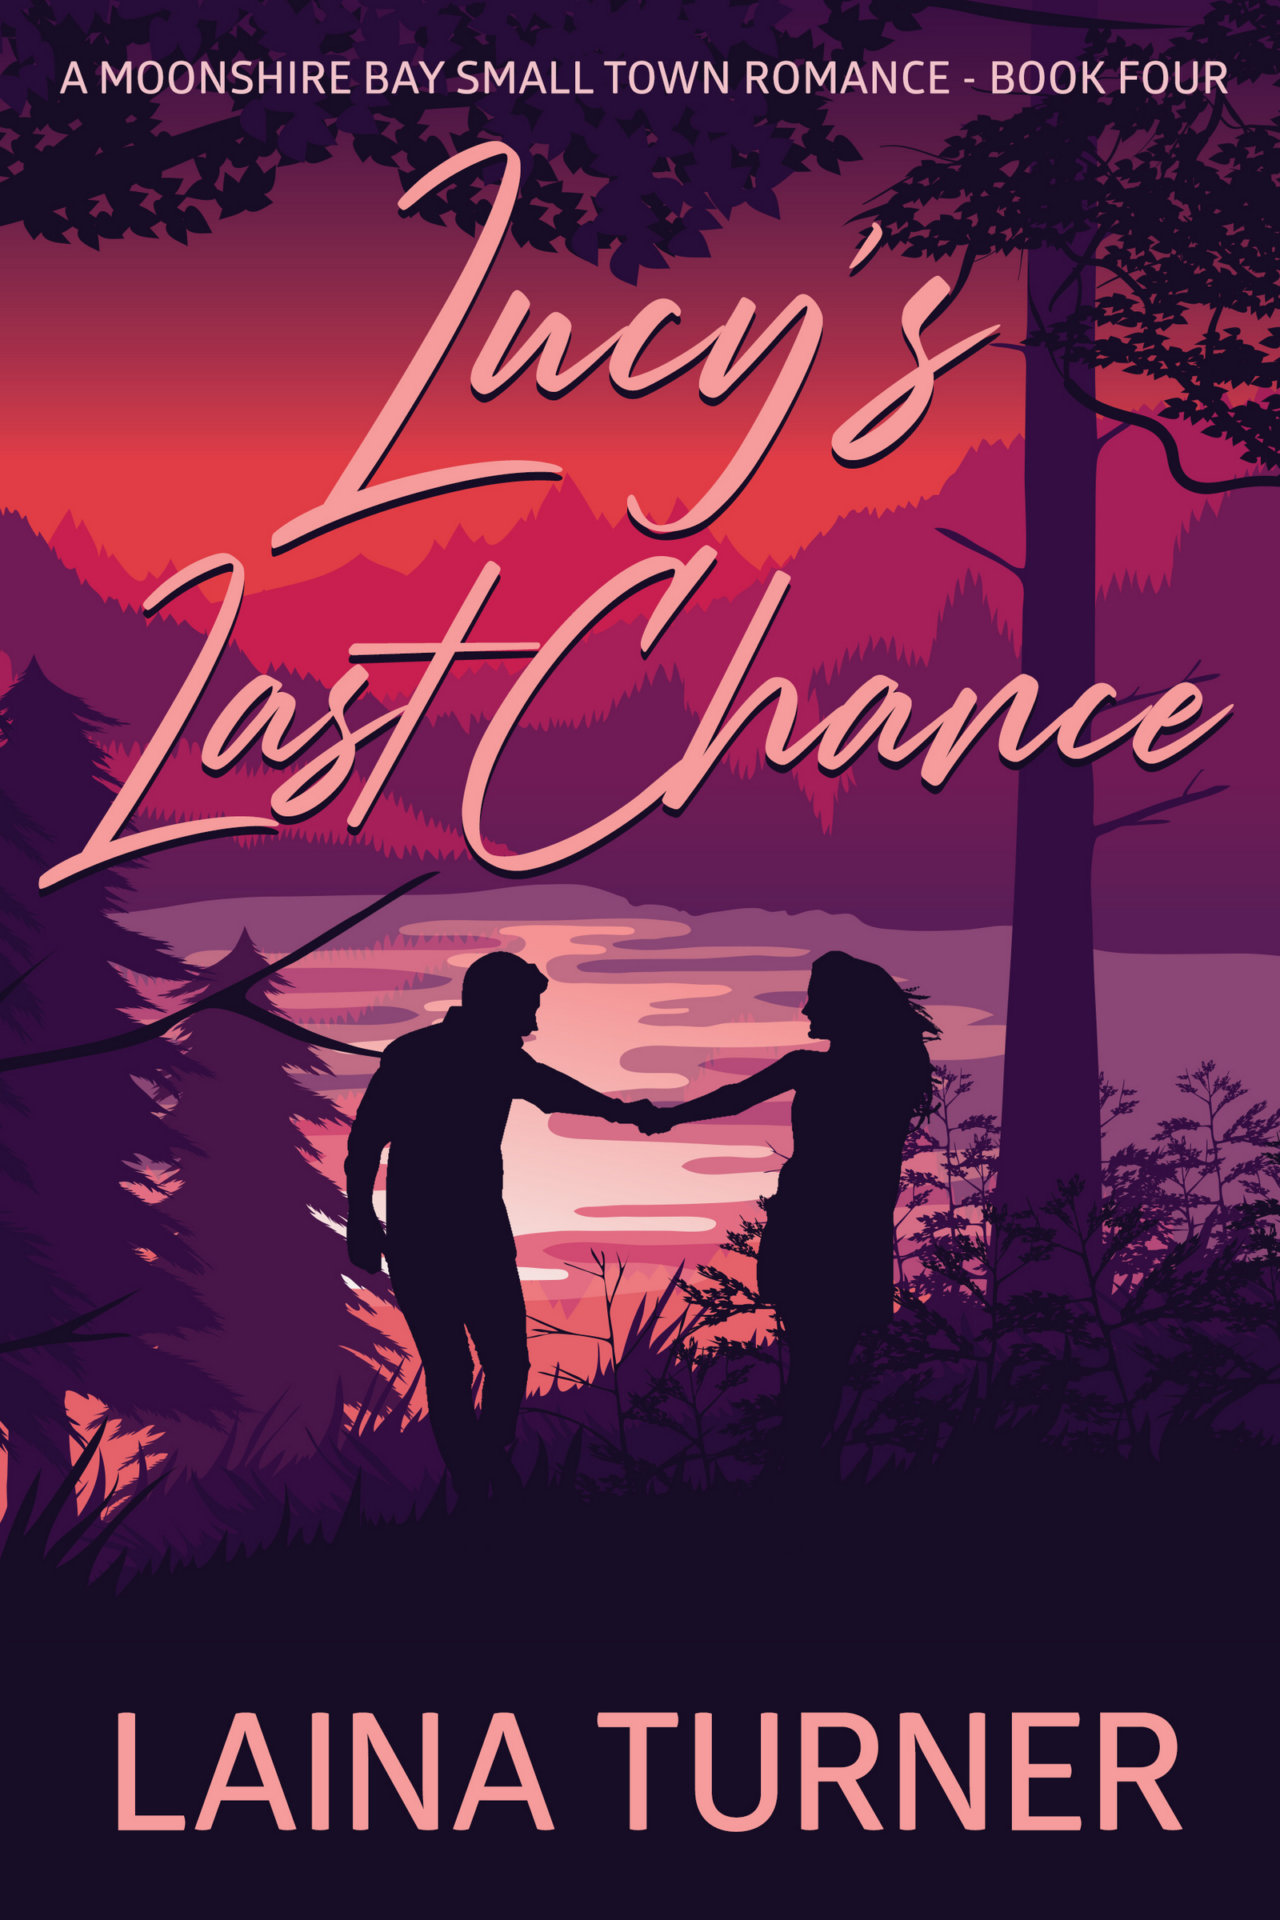 Lucy’s Last Chance – A Moonshire Bay Small Town Romance Book 4